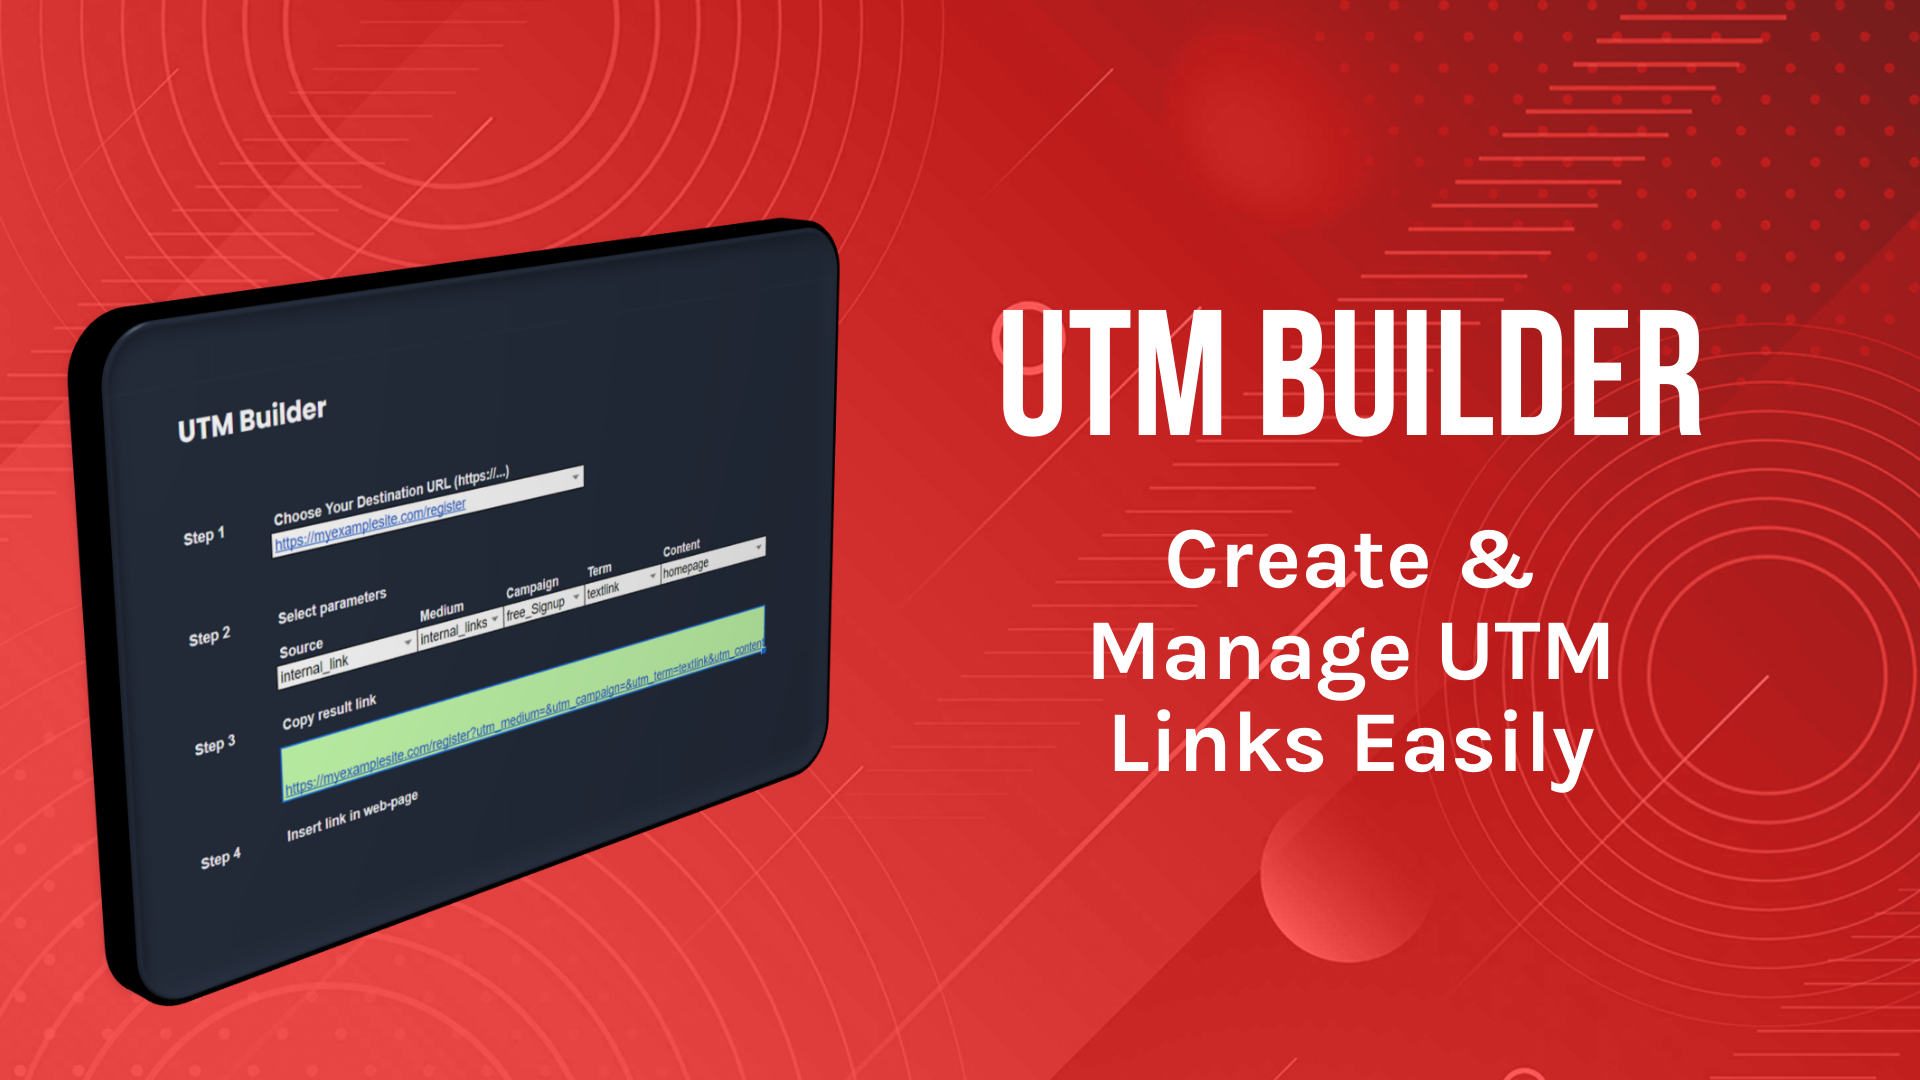 UTM Link Builder tool to create and manage UTM links